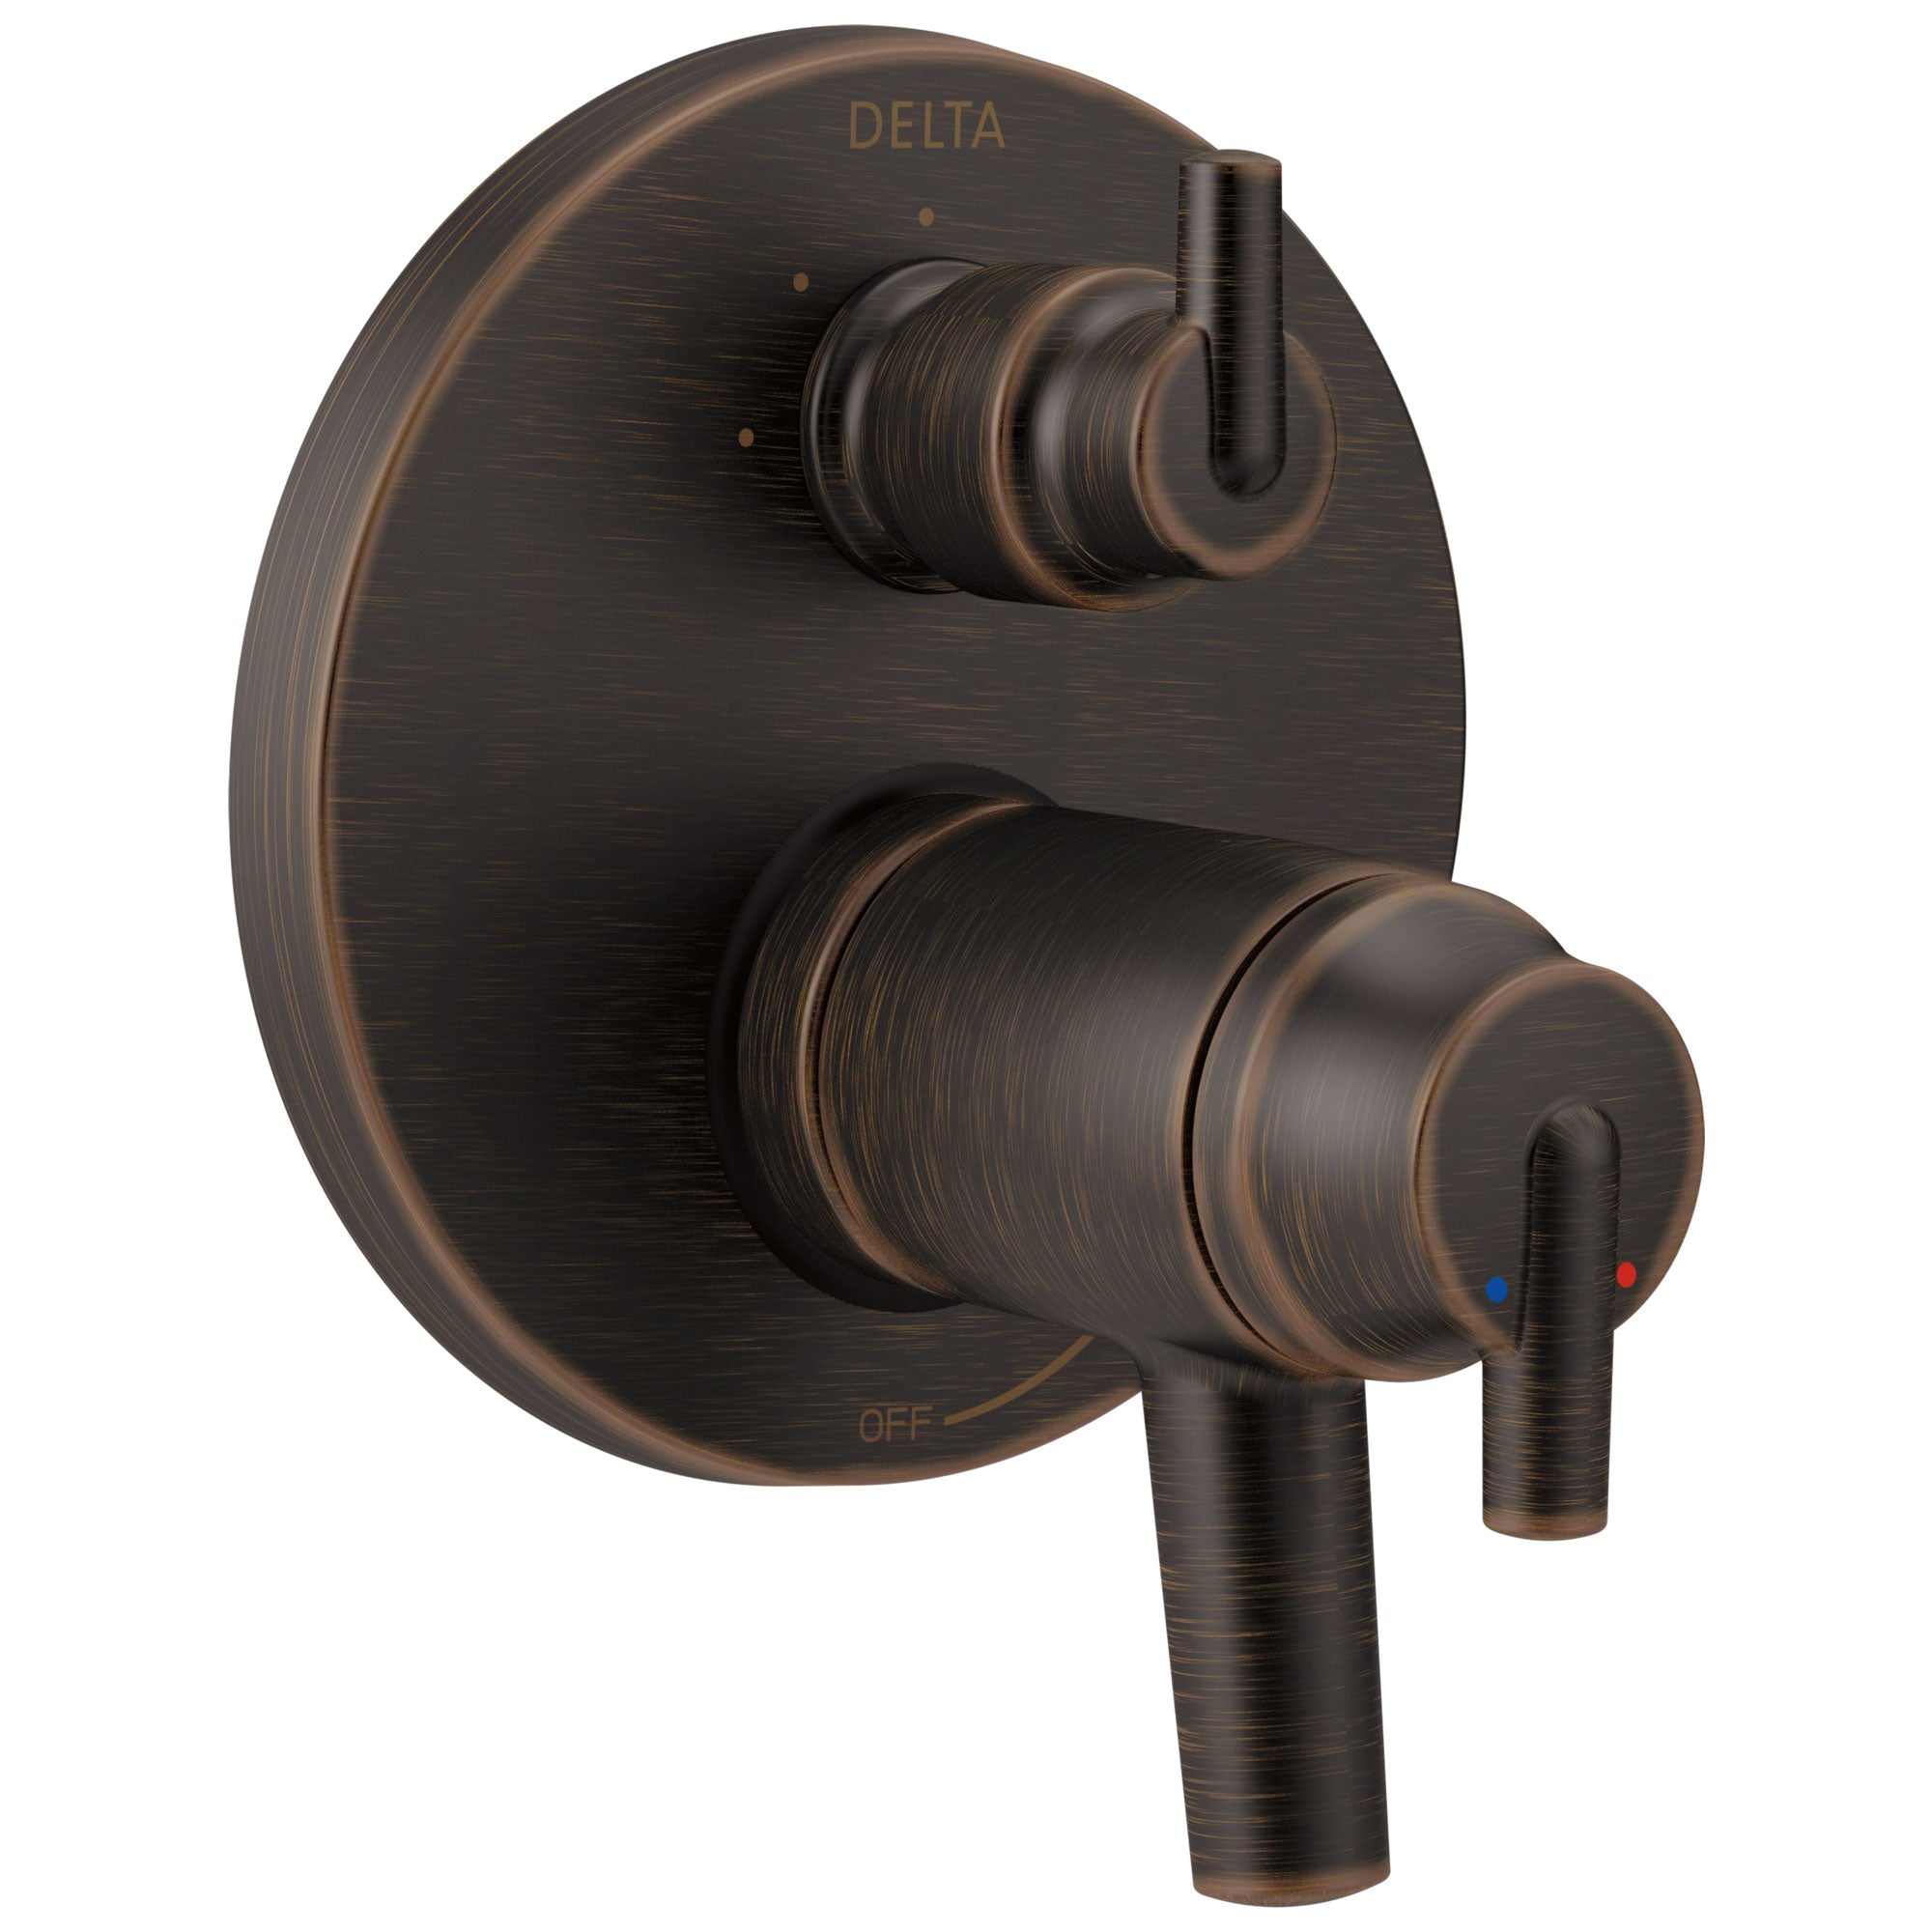 Delta Trinsic Collection Venetian Bronze Thermostatic Shower Faucet Control Handle with 3-Setting Integrated Diverter Trim (Requires Valve) DT27T859RB